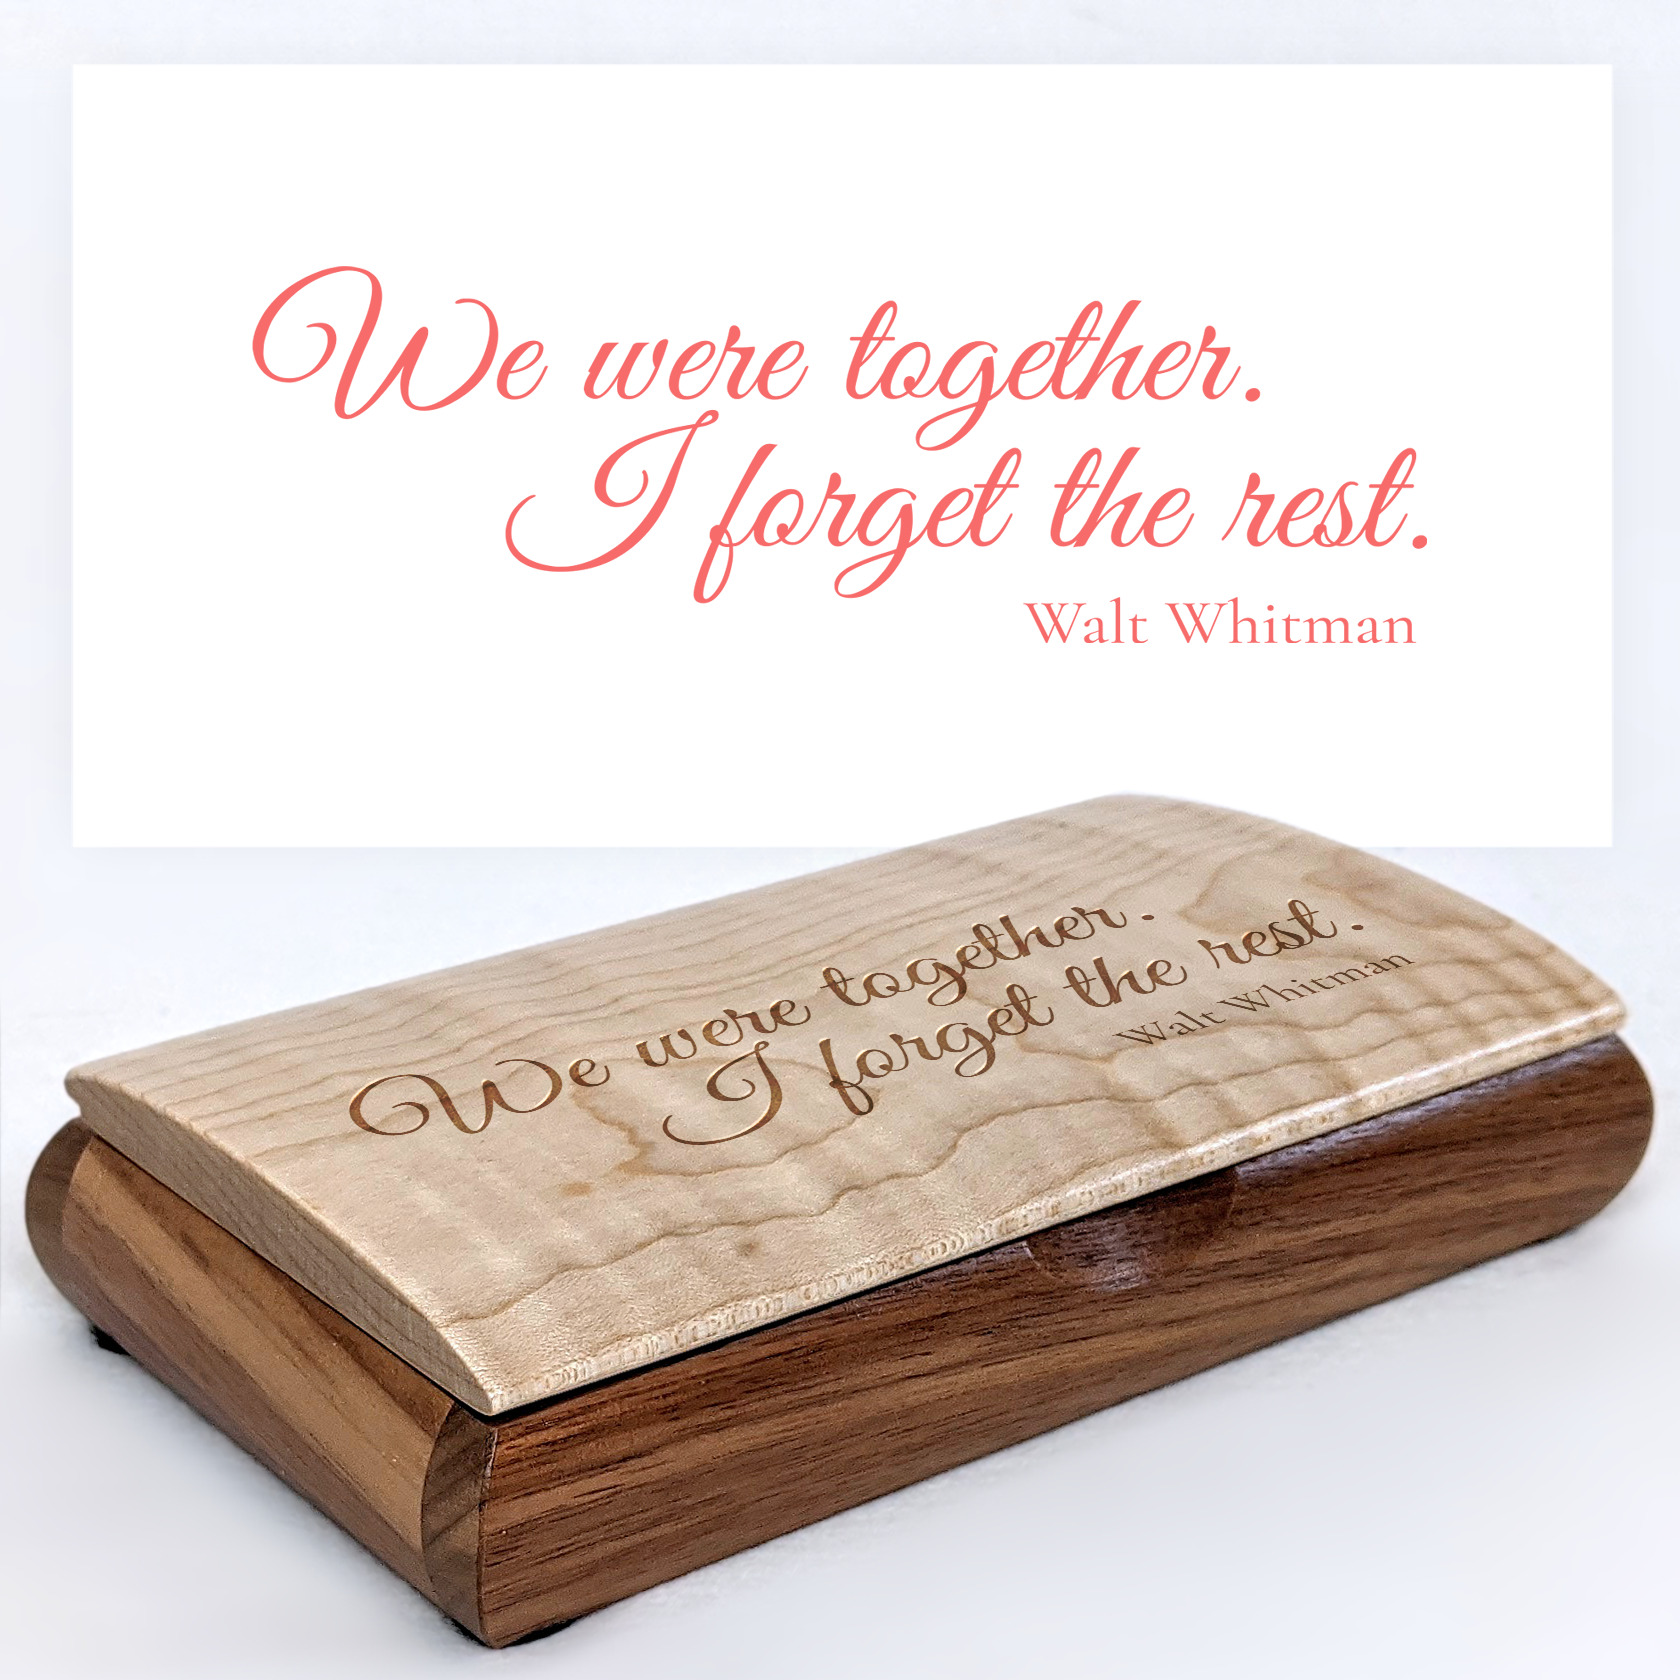 Valentines Day Gifts for Her, Him - Custom Wooden Plaque for Couples w/Name  - 3 Size Options - TOP-Notch CRAFTMANSHIP